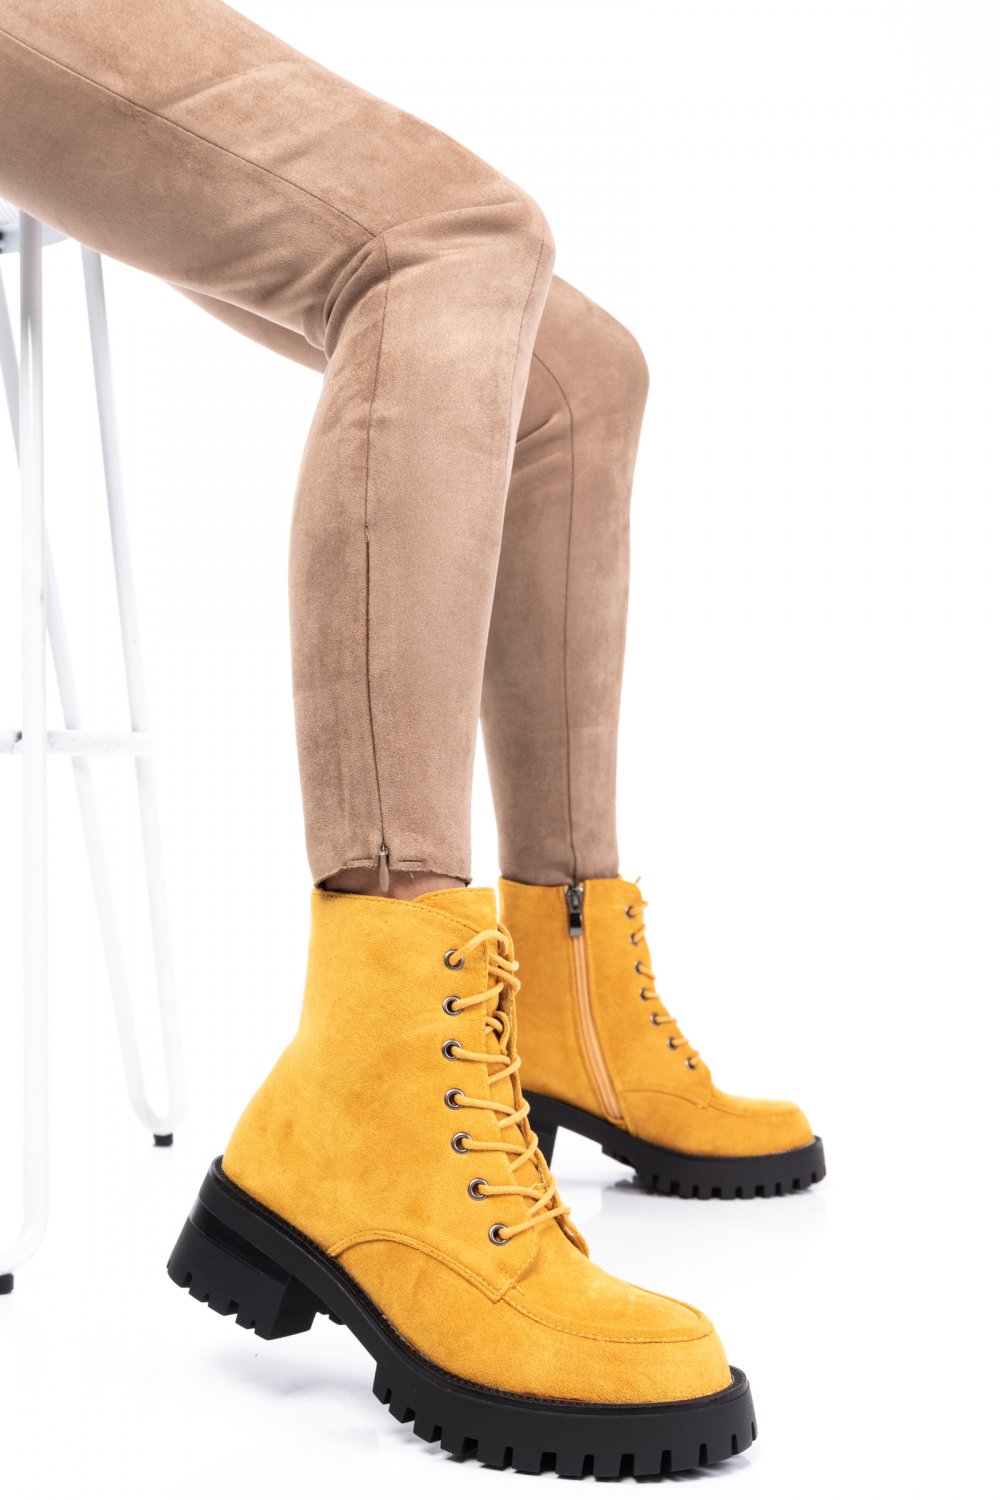 GHETE YELLOW SUEDE FSPBW031